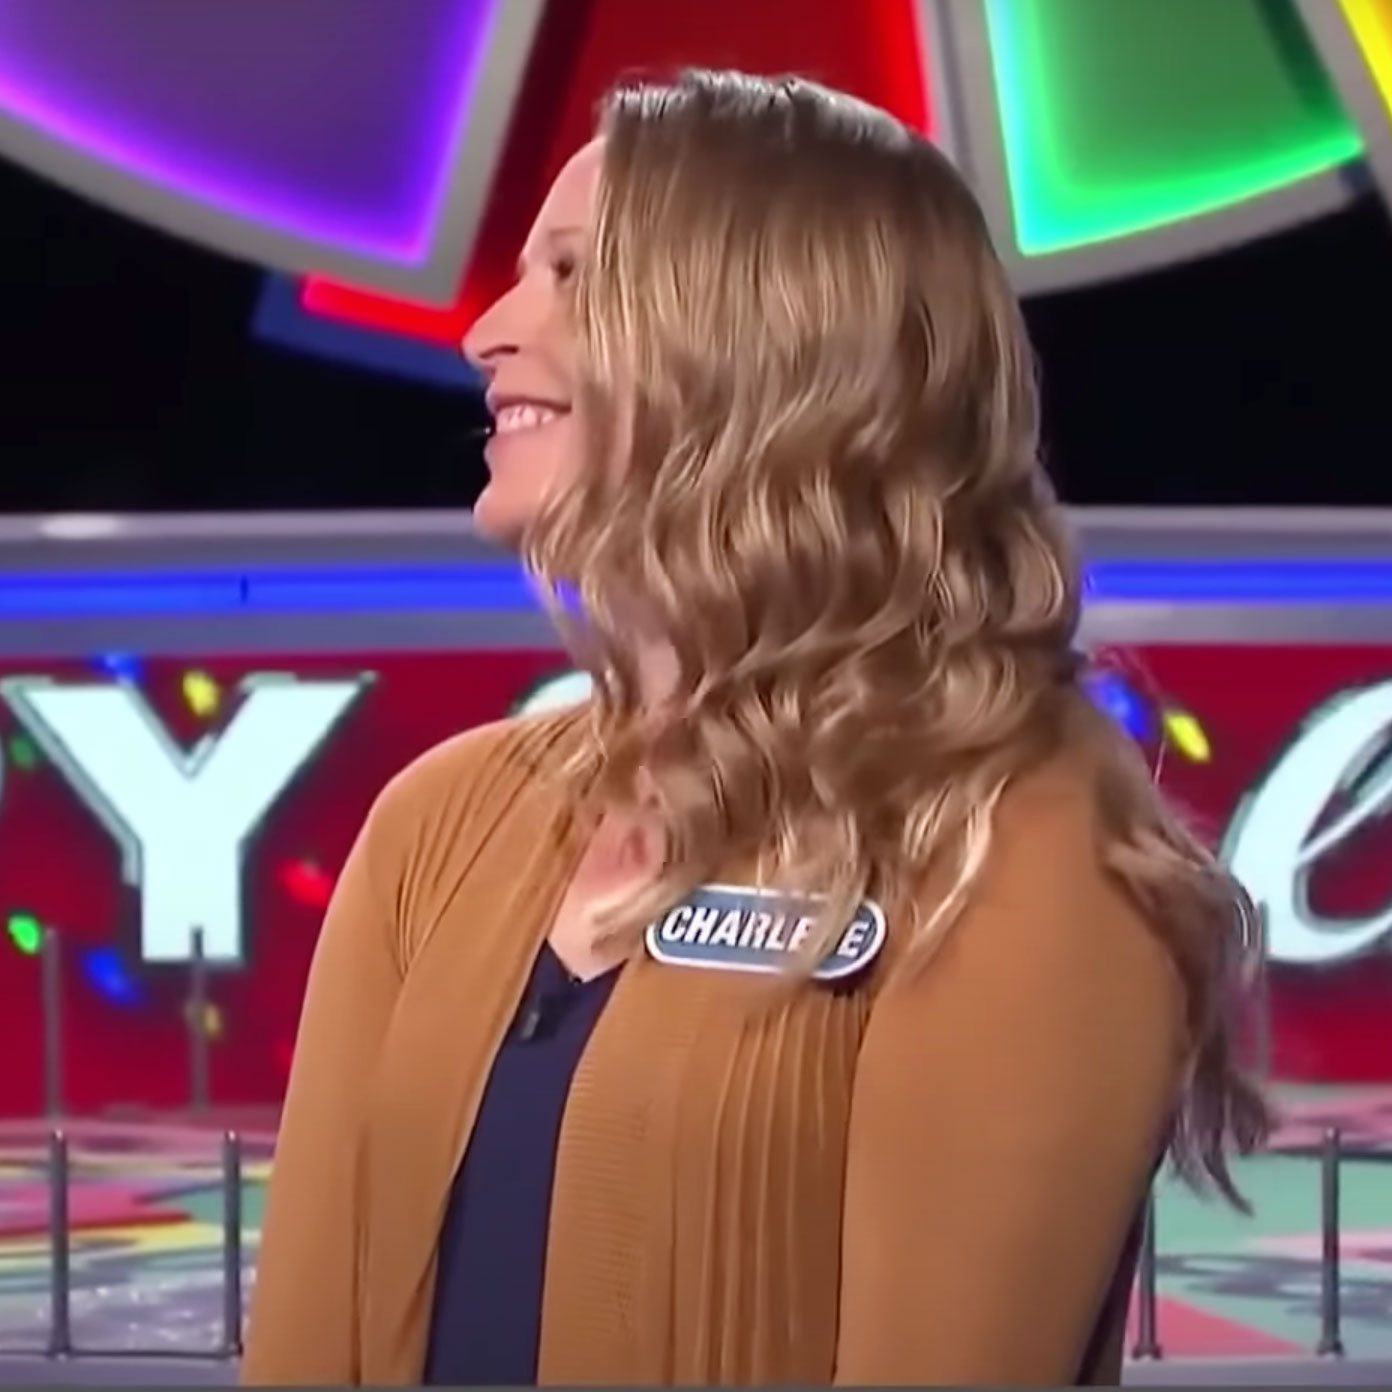 Wheel Fortune Snafus Wild Moments Over Years